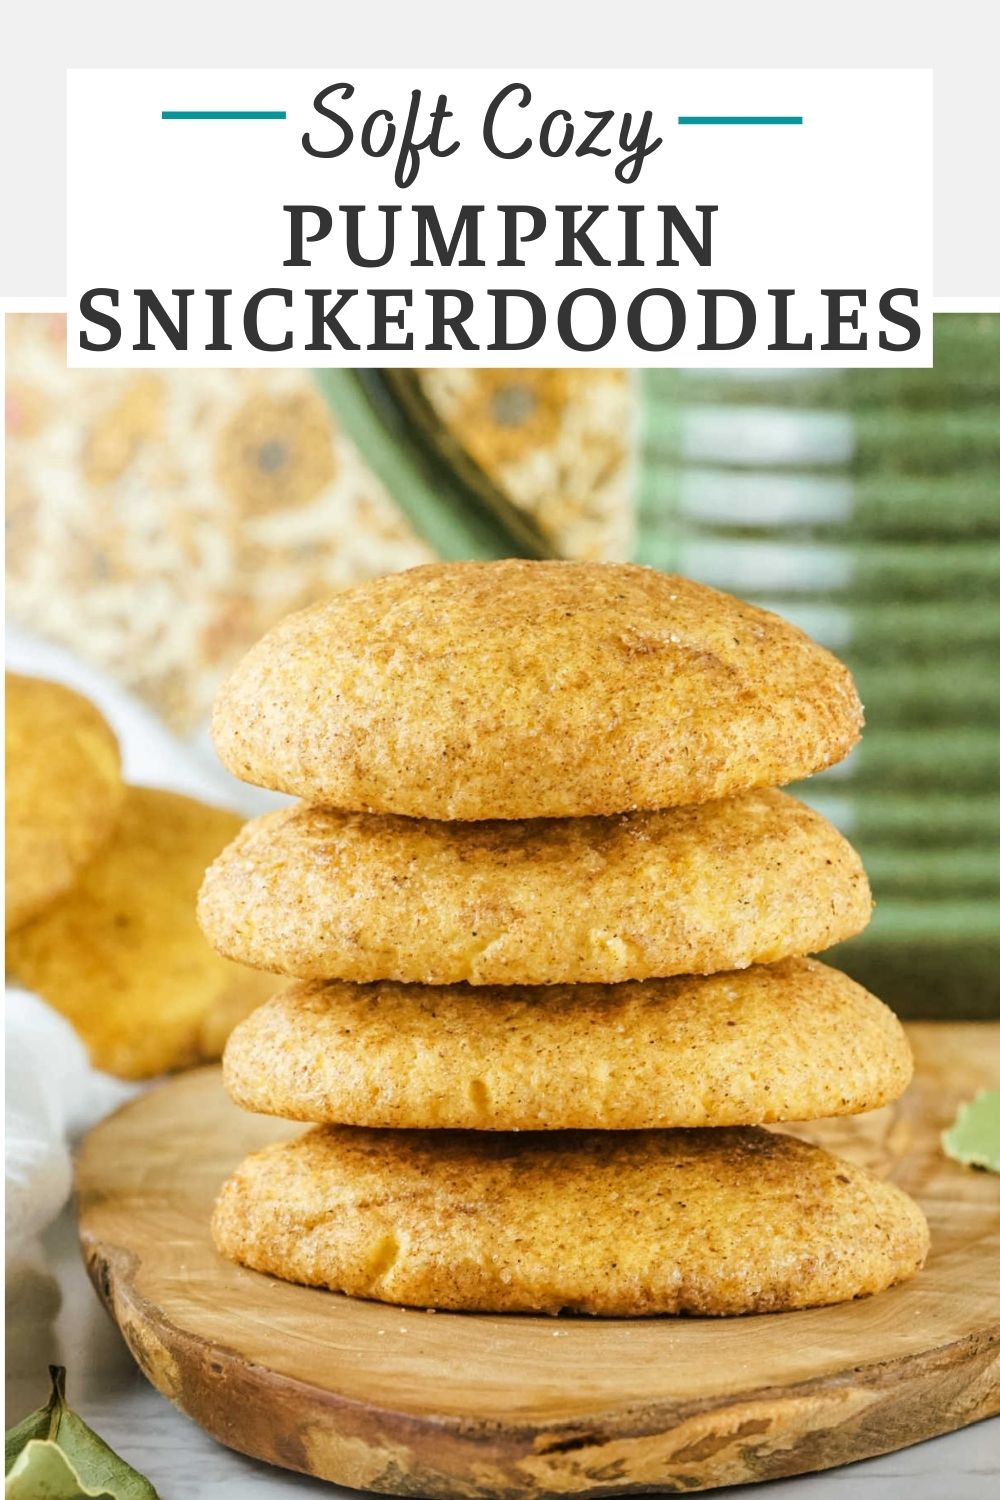 Take the classic cookie to the next level with pumpkin and pumpkin pie spice. These soft pumpkin snickerdoodle cookies are a perfect excuse to make a Christmas classic in the fall too!